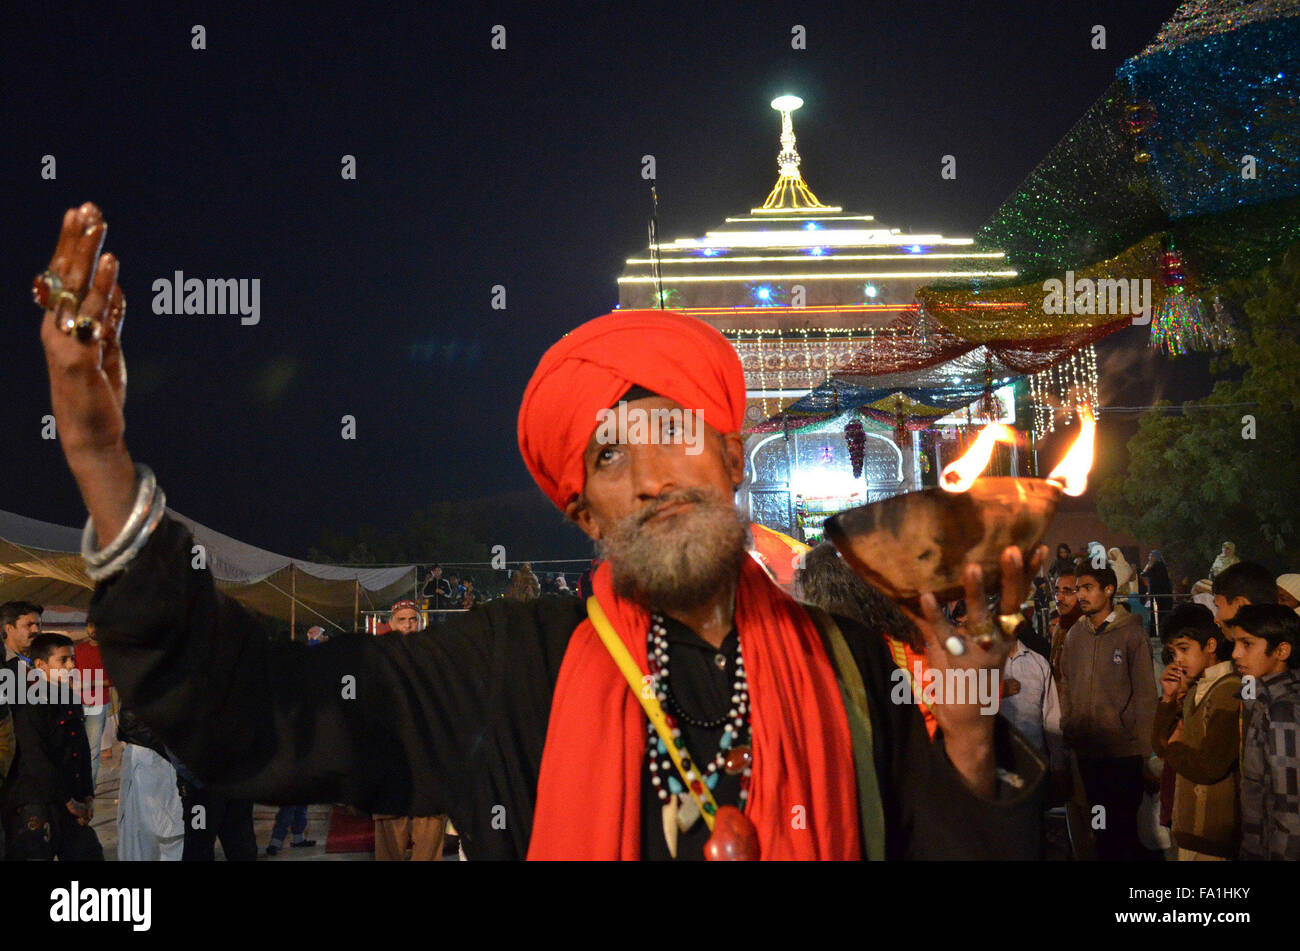 Lahore. 19th Dec, 2015. A Muslim devotee holds an oil lamp as he dances at the shrine of the Sufi saint Mian Mir Sahib during a festival to mark the saint's death anniversary in eastern Pakistan's Lahore, Dec. 19, 2015. Hundreds of devotees are attending the two-day festival. © Jamil Ahmed/Xinhua/Alamy Live News Stock Photo